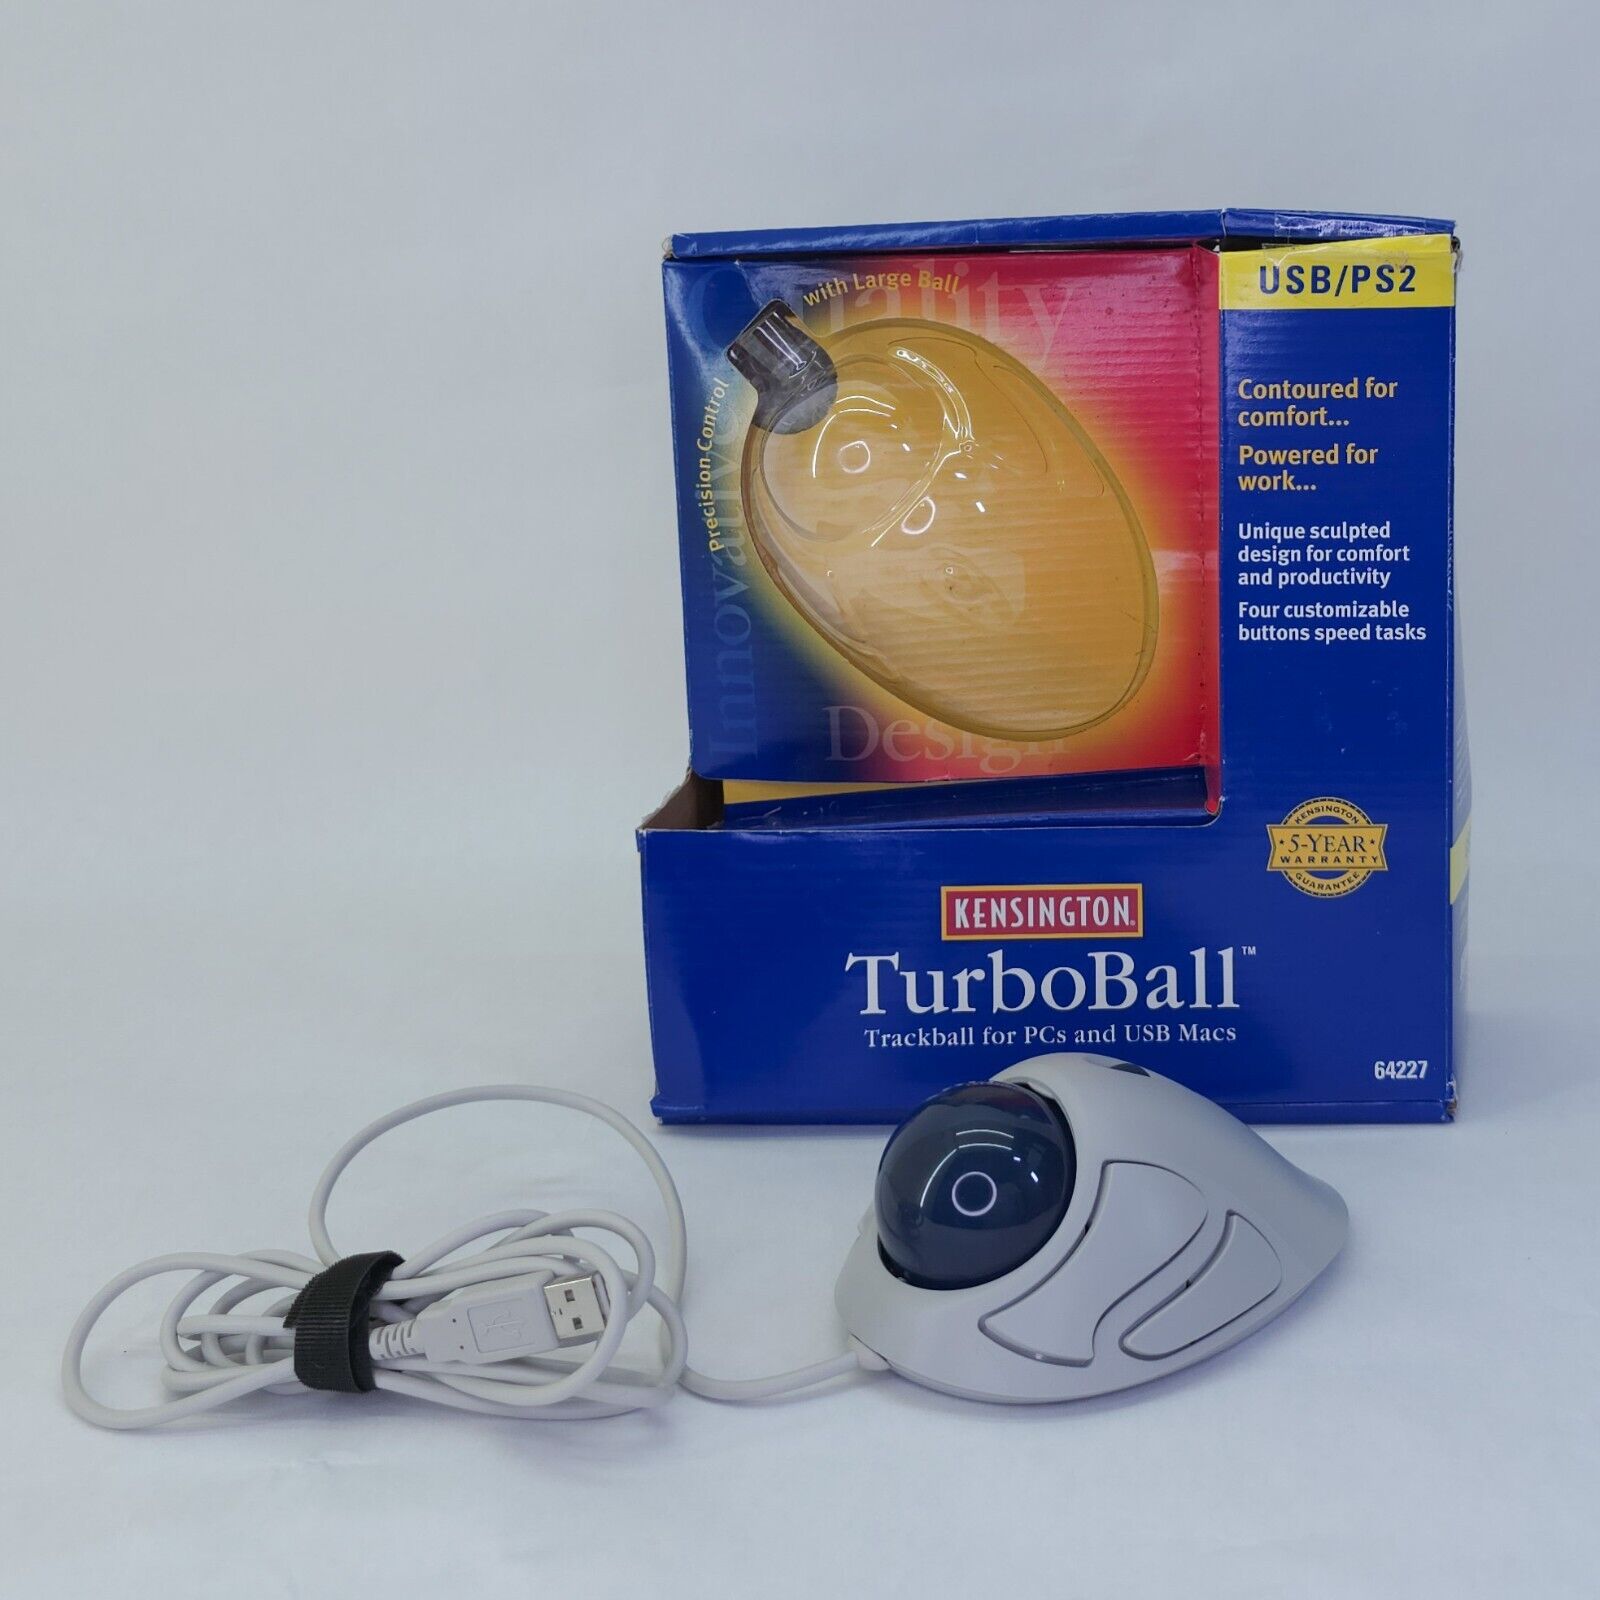 TurboBall USB/PS2 Kensington 64227 Scrolling Mouse Trackball New Open Box TESTED